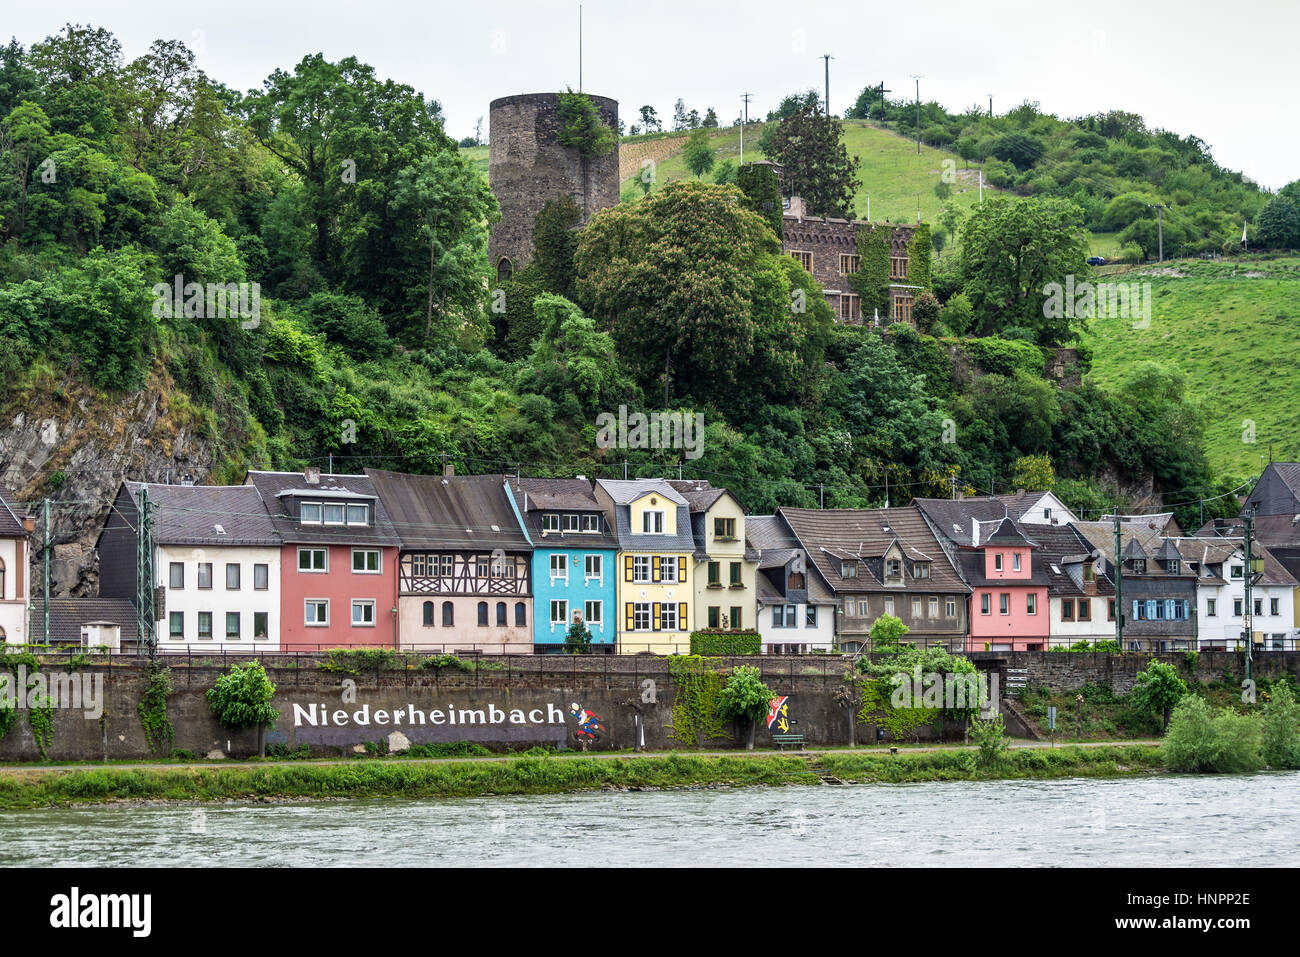 Niederheimbach, Germany - May 23, 2016: Niederheimbach village in the Unesco World Heritage area of the Rhine Valley in cloudy weather Stock Photo